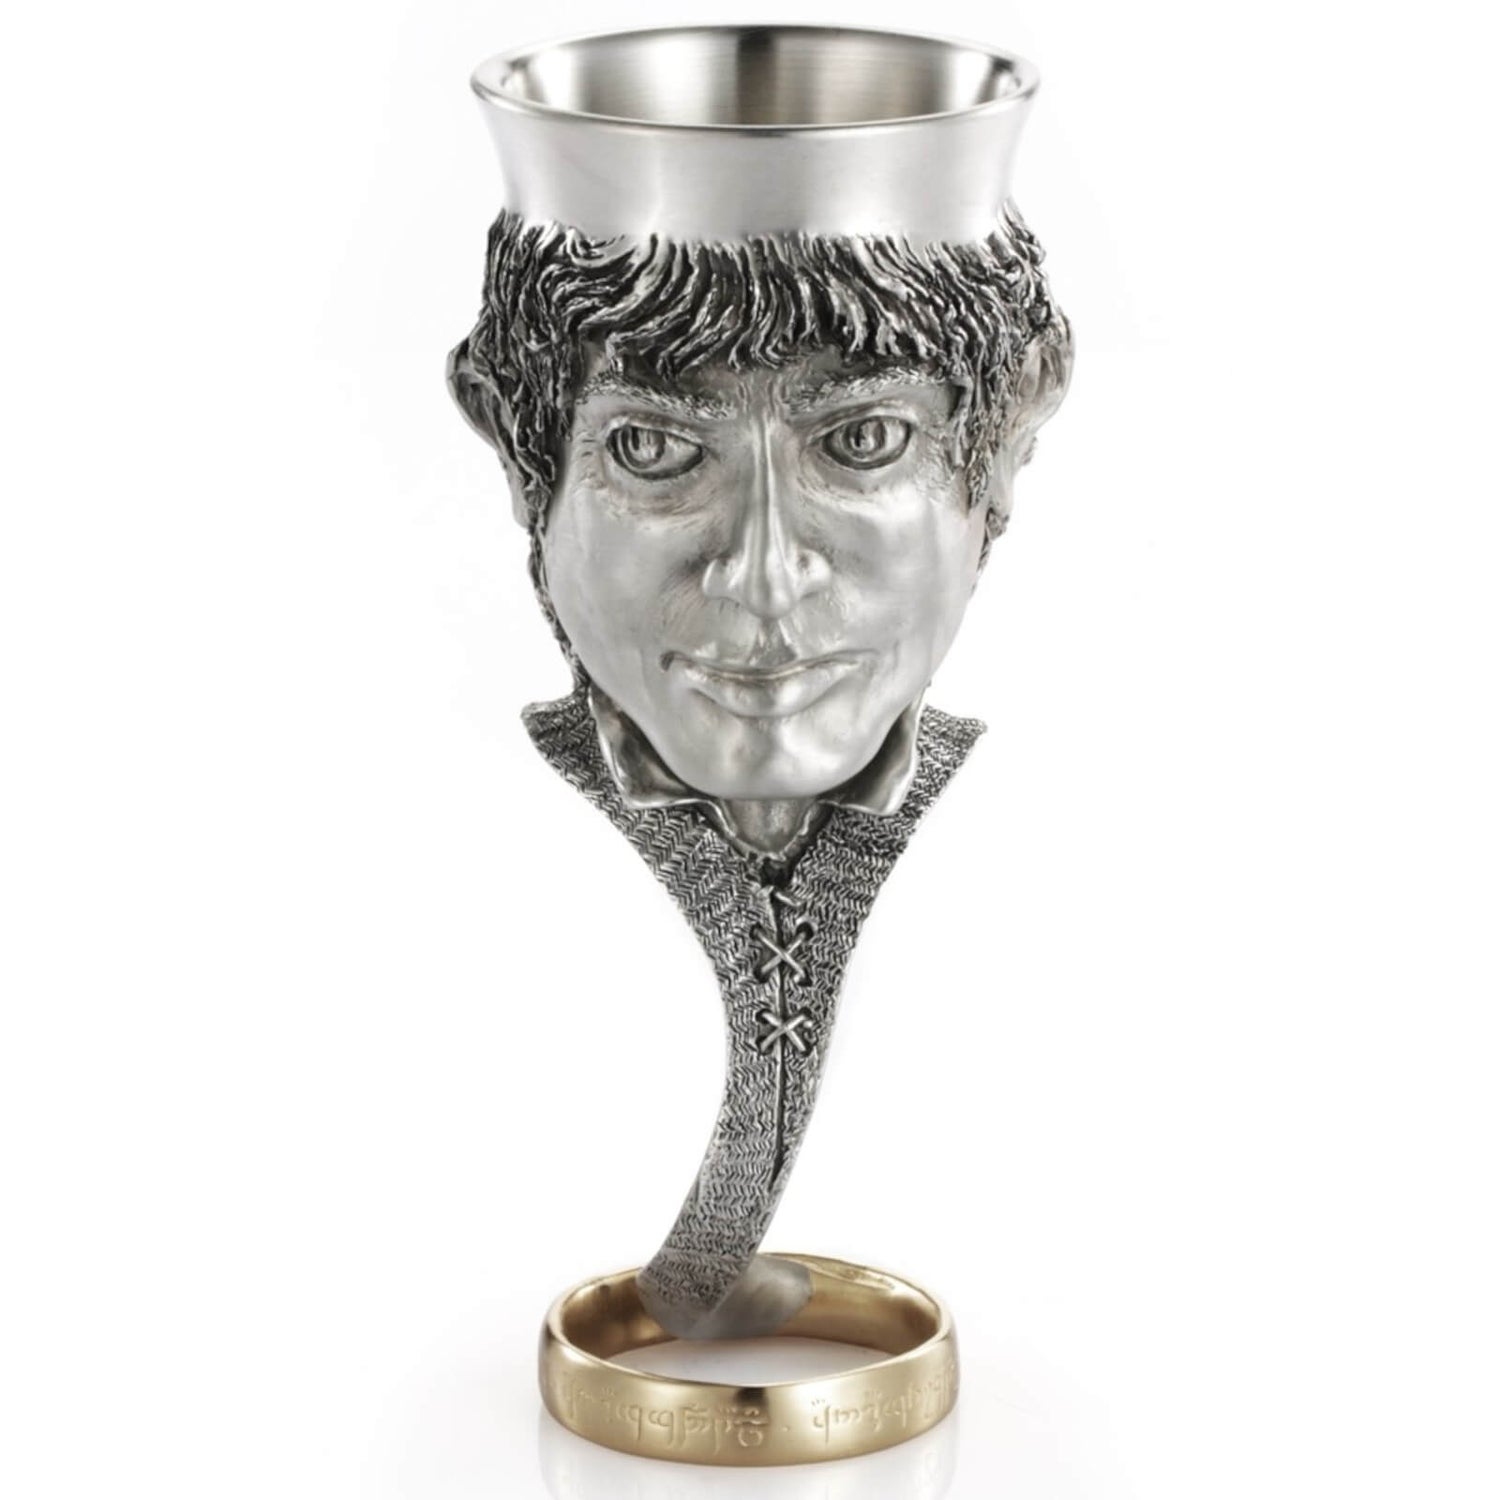 Royal Selangor Lord of the Rings Pewter Goblet - Frodo